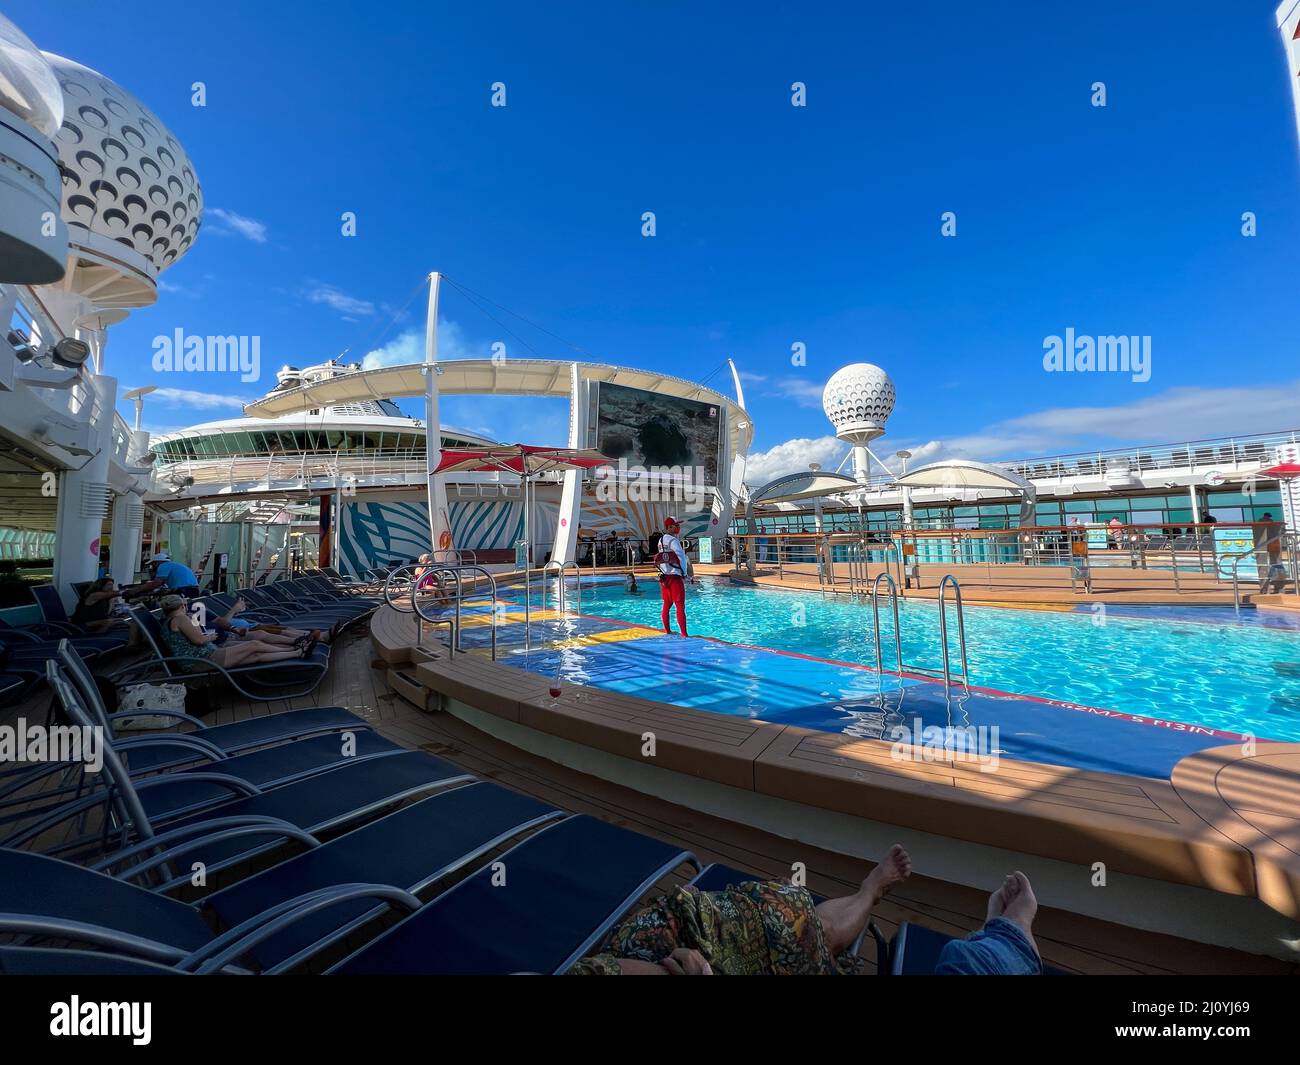 Orlando, FL USA - December 6, 2021:  The  main swimming pool area on the Royal Caribbean Cruise Ship Independence of the Seas in Port Canaveral, Flori Stock Photo